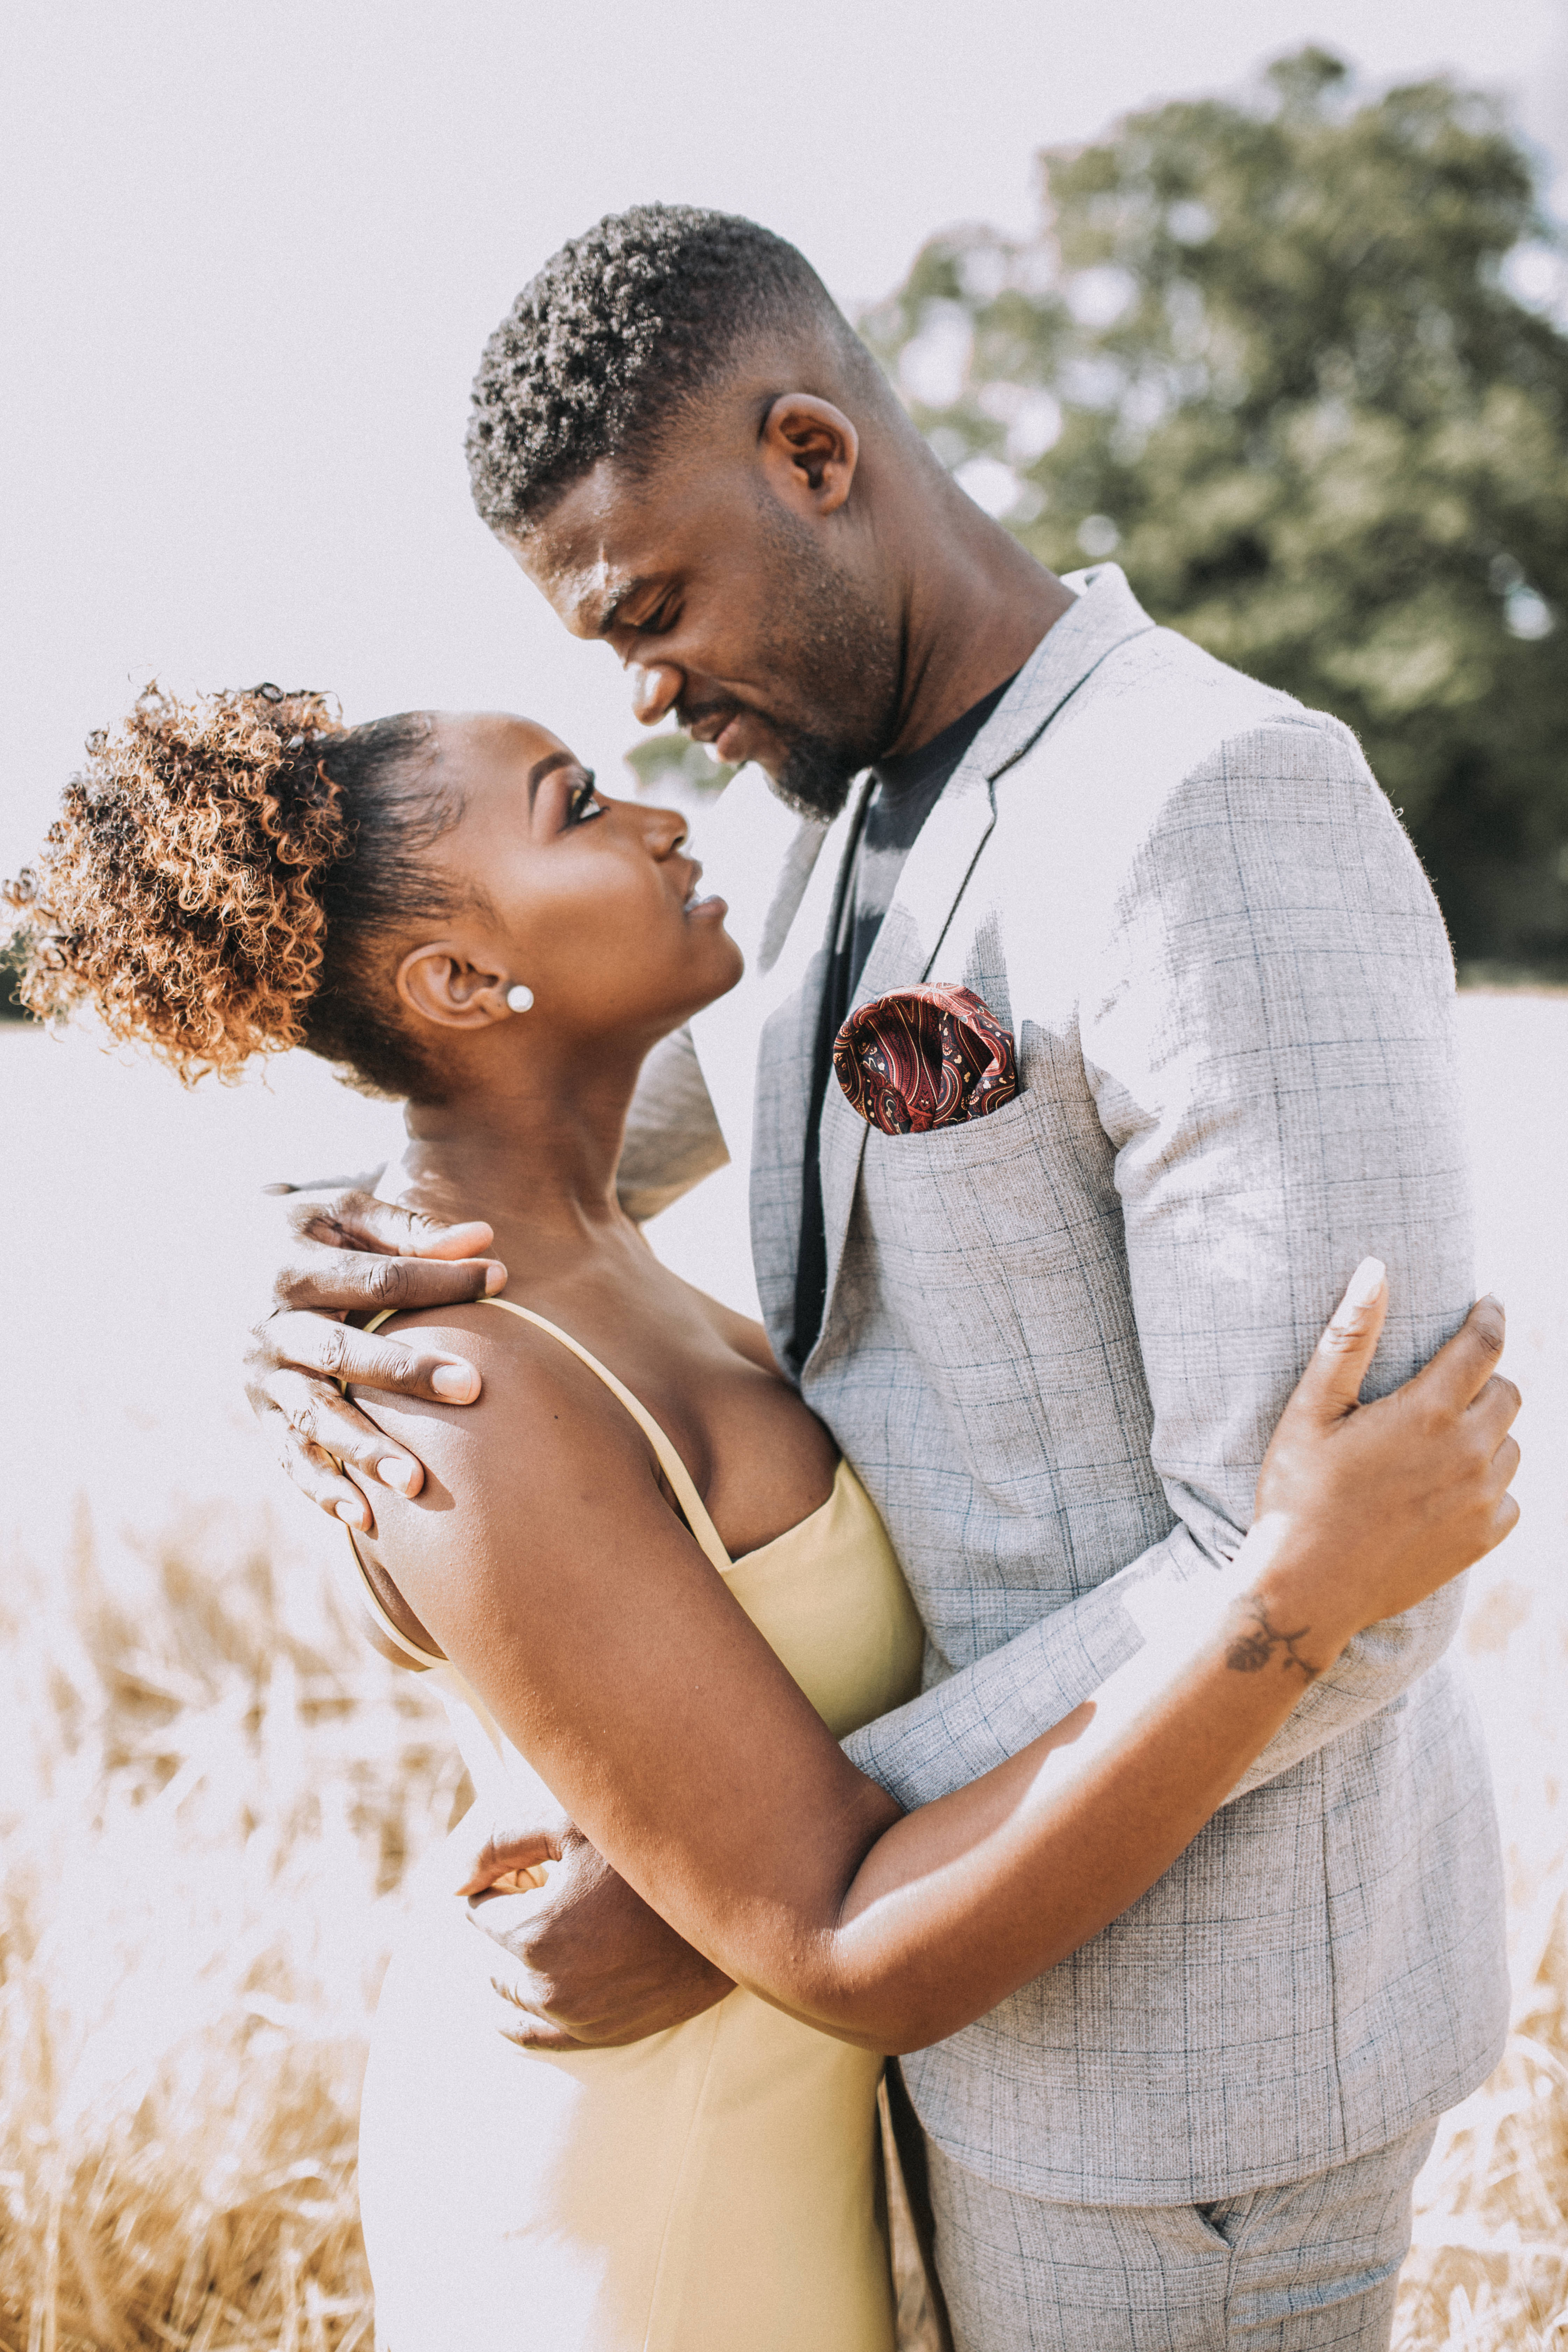 Insta Couple Crush Of The Week: Karl And Cassie Lokko's Woke Wedding Photos Went Viral and Now They Have A Baby On The Way
